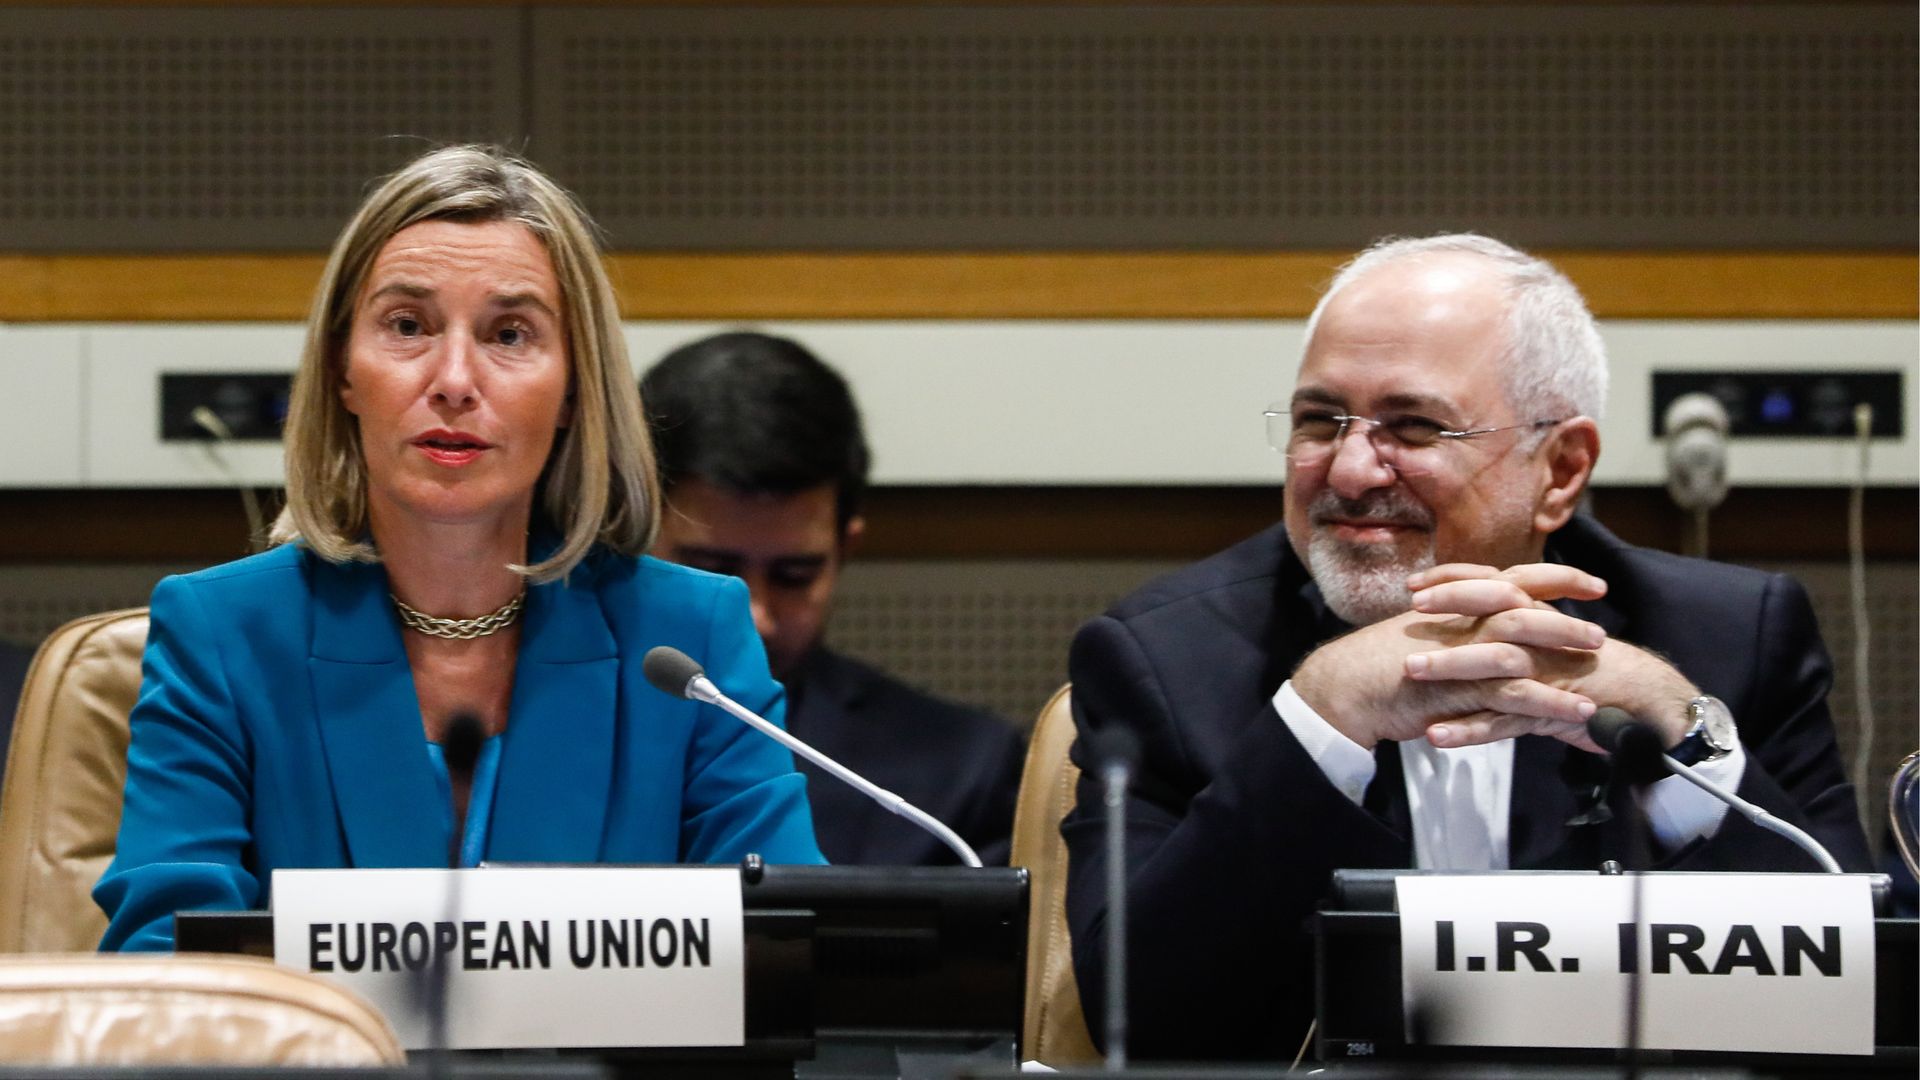 EU foreign minister sitting next to Iran foreign minister